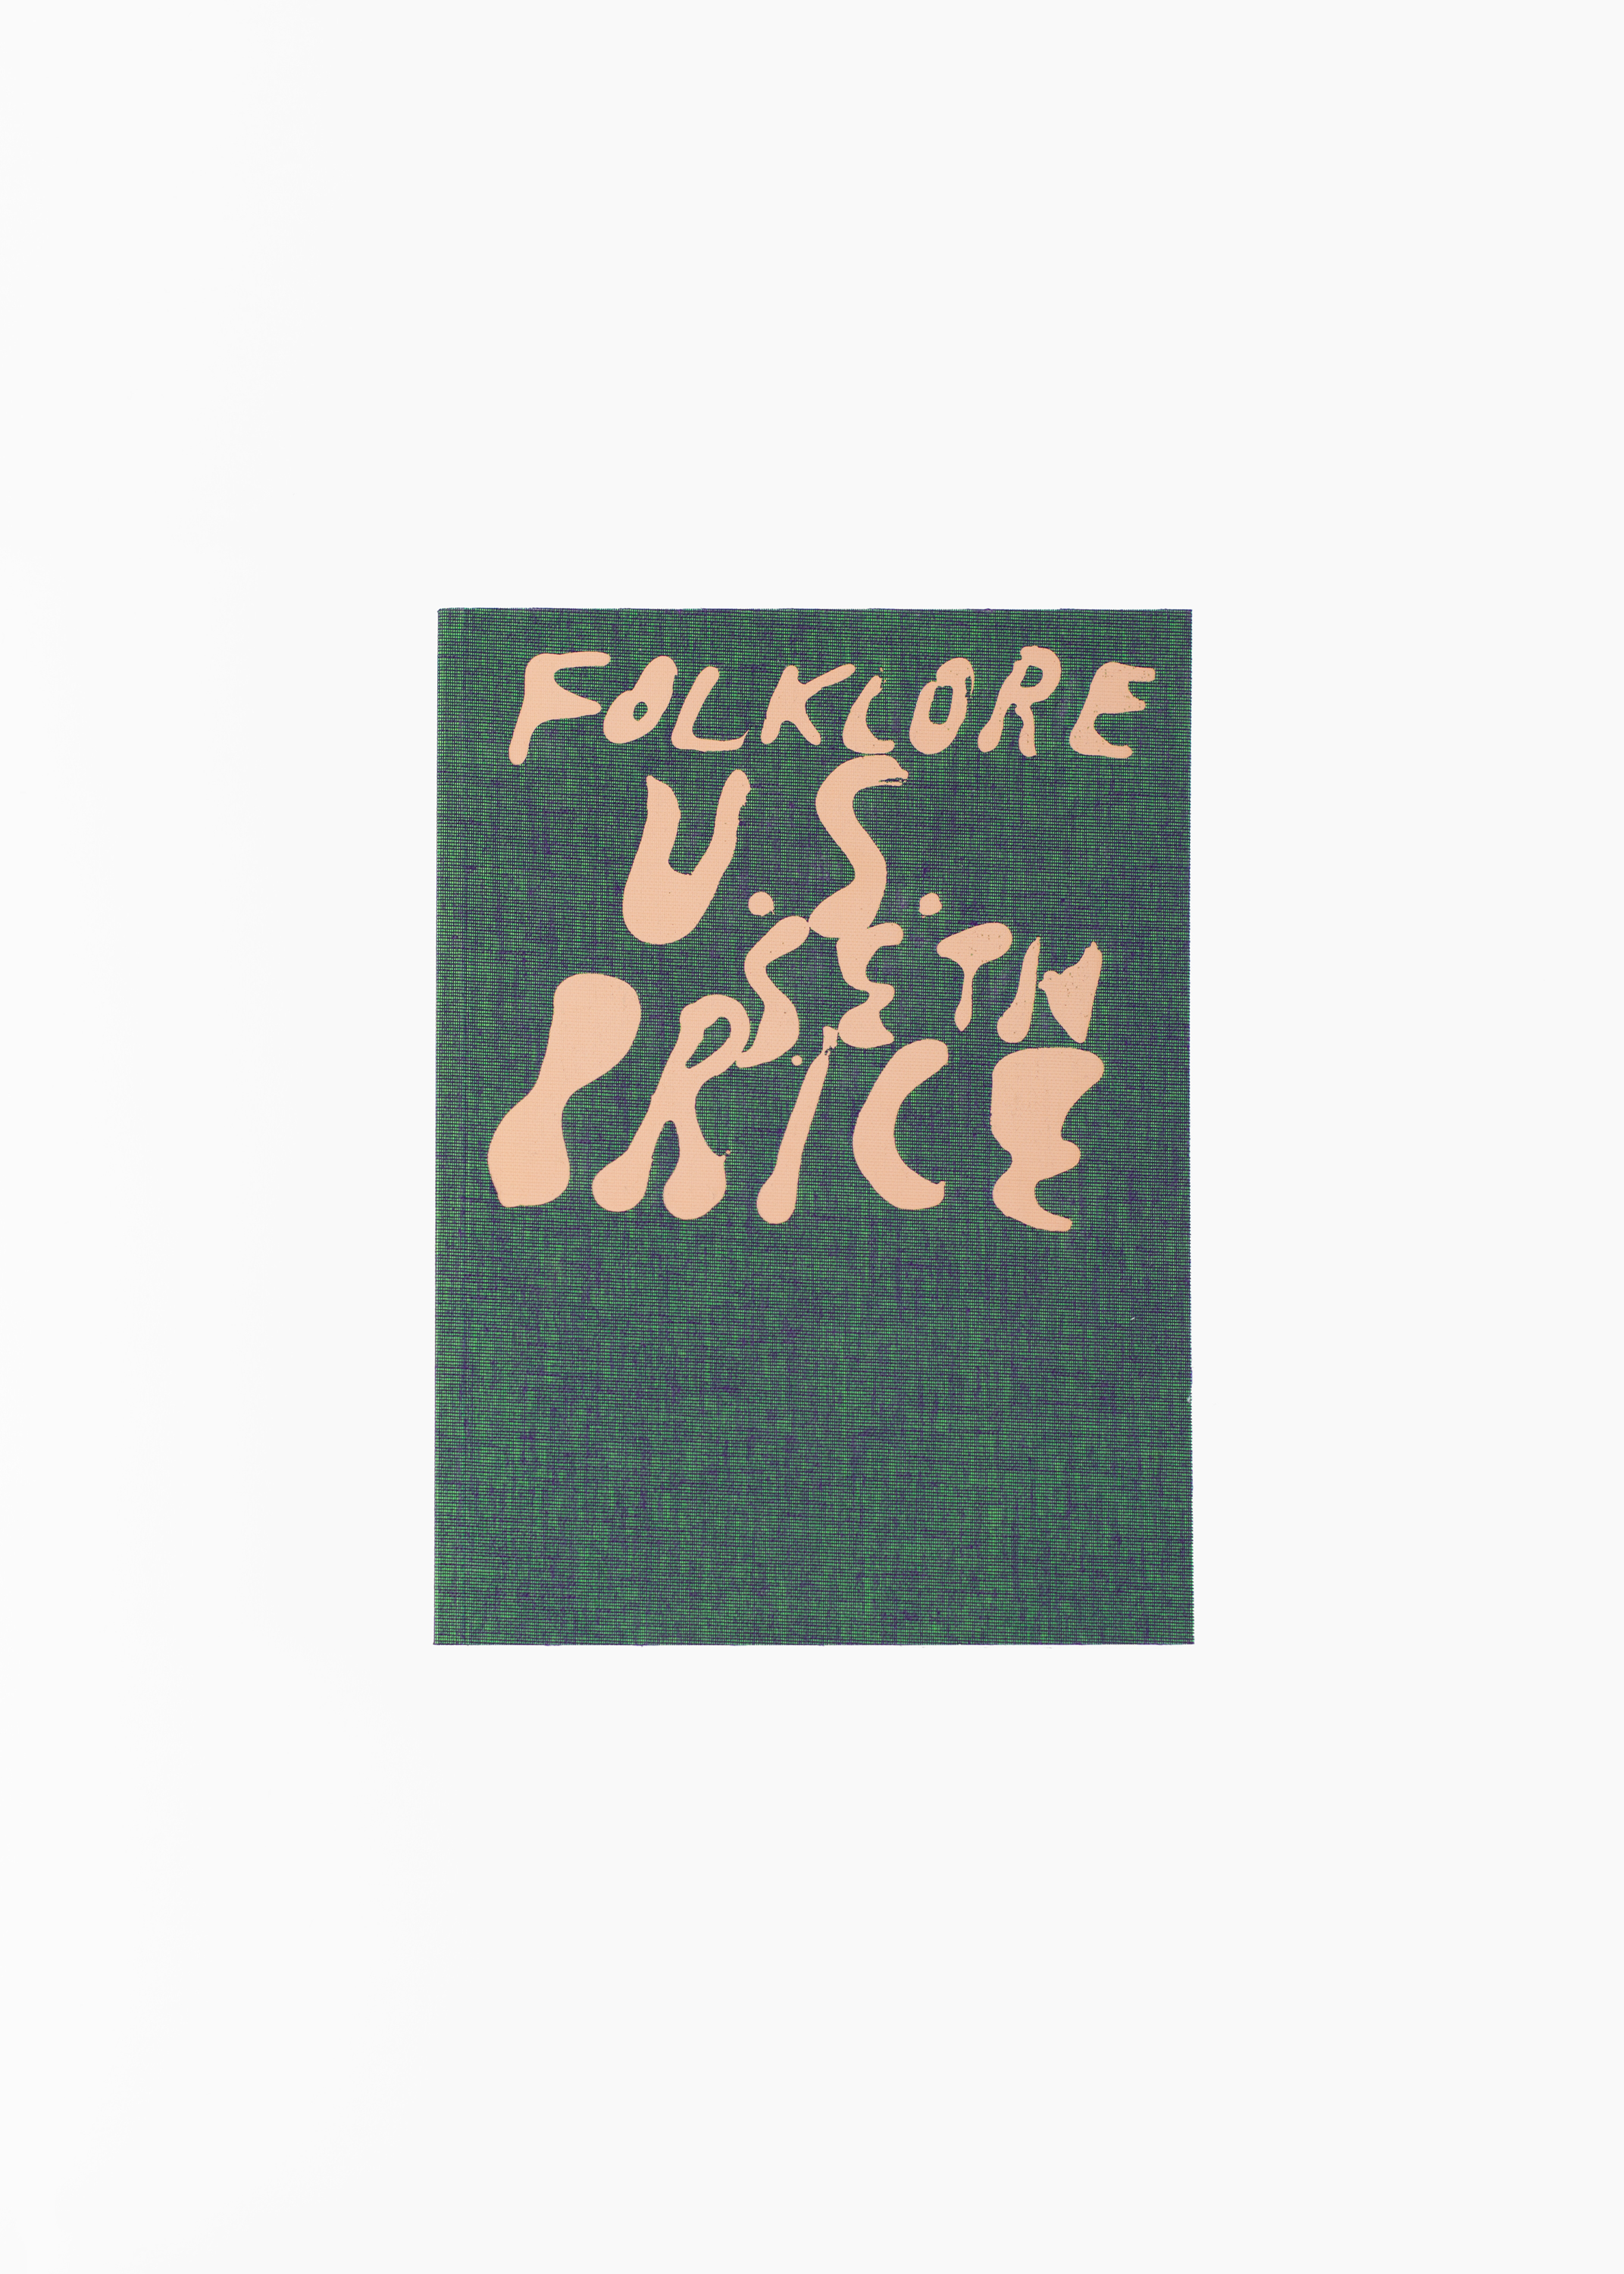 Seth Price - Folklore U.S.</br>240 pages 17 x 23 cm</br>Walther König 2015</br>Sold out